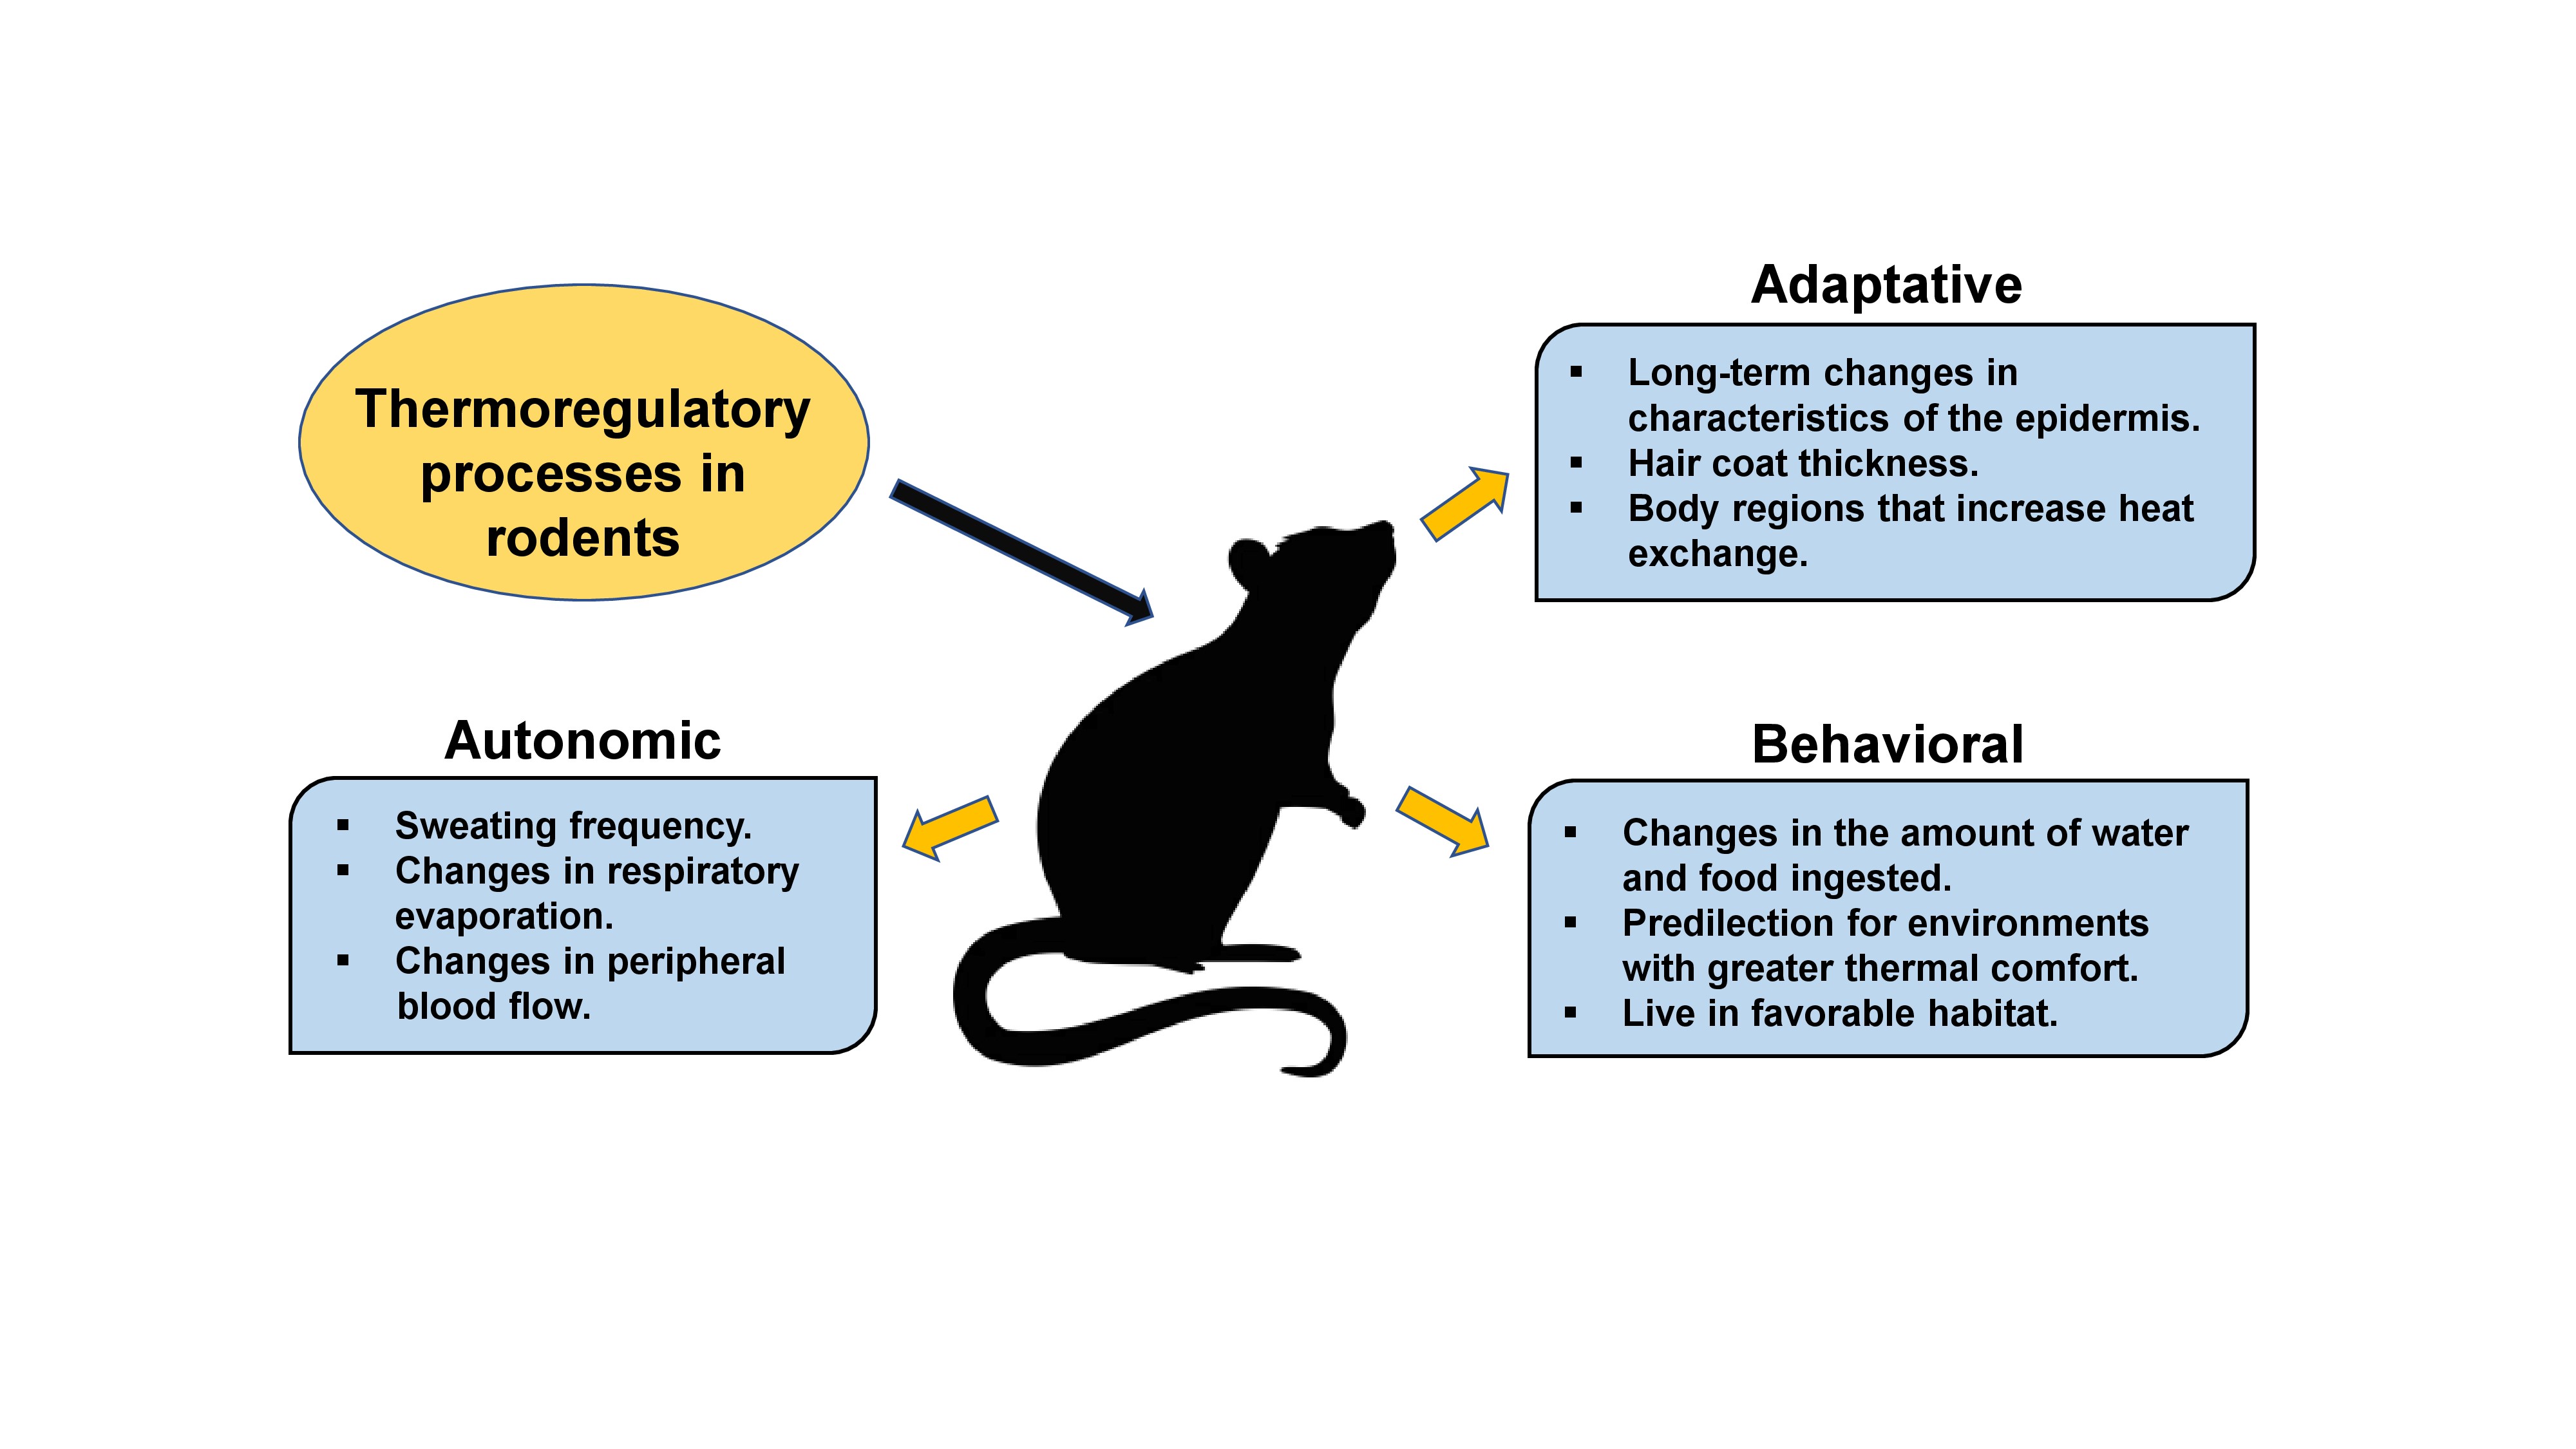 Schematic drawing of thermoregulatory processes in rodents.